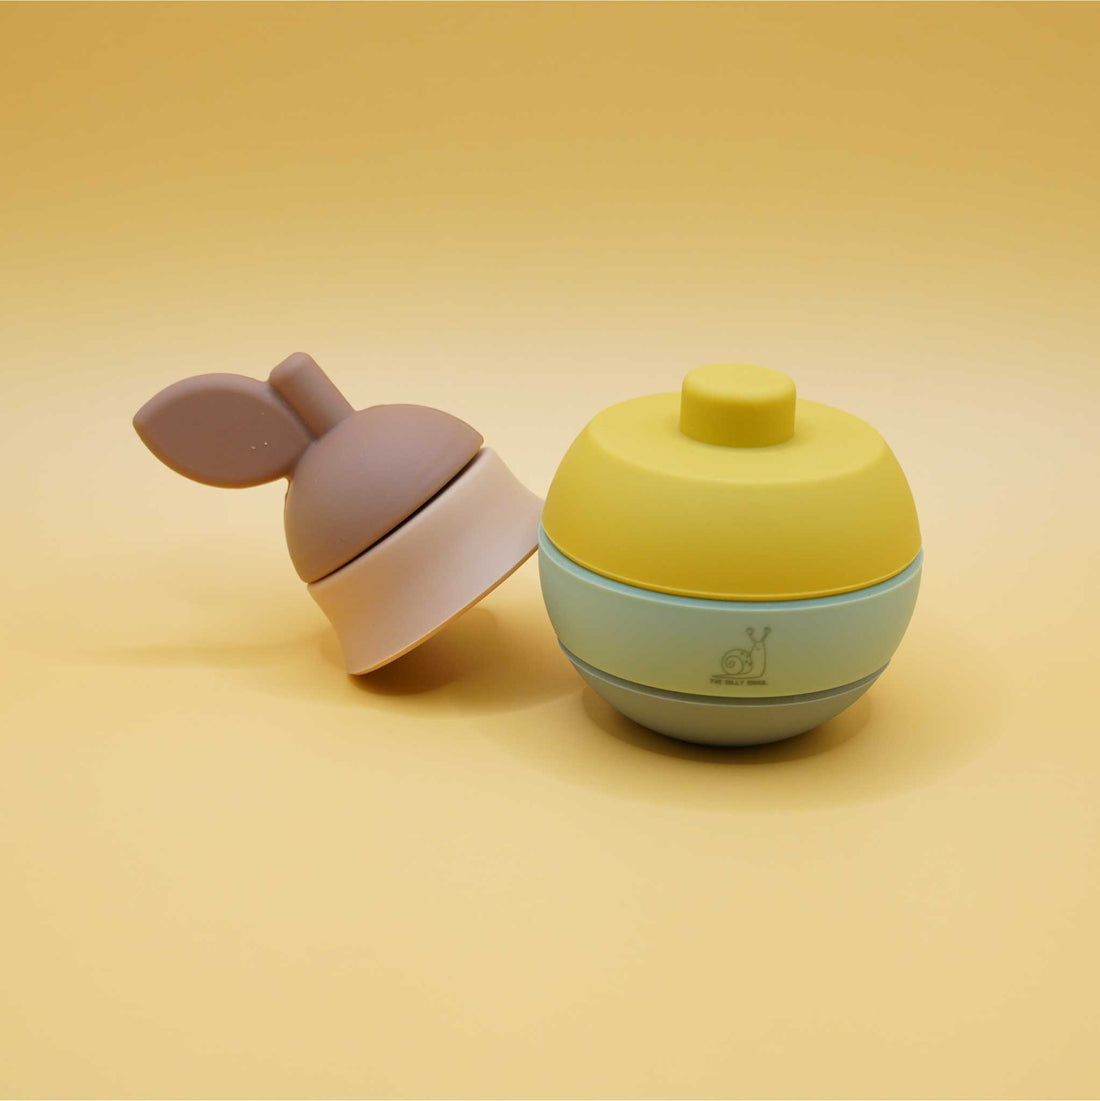 pieces apart of pear shaped silicone stacking toy